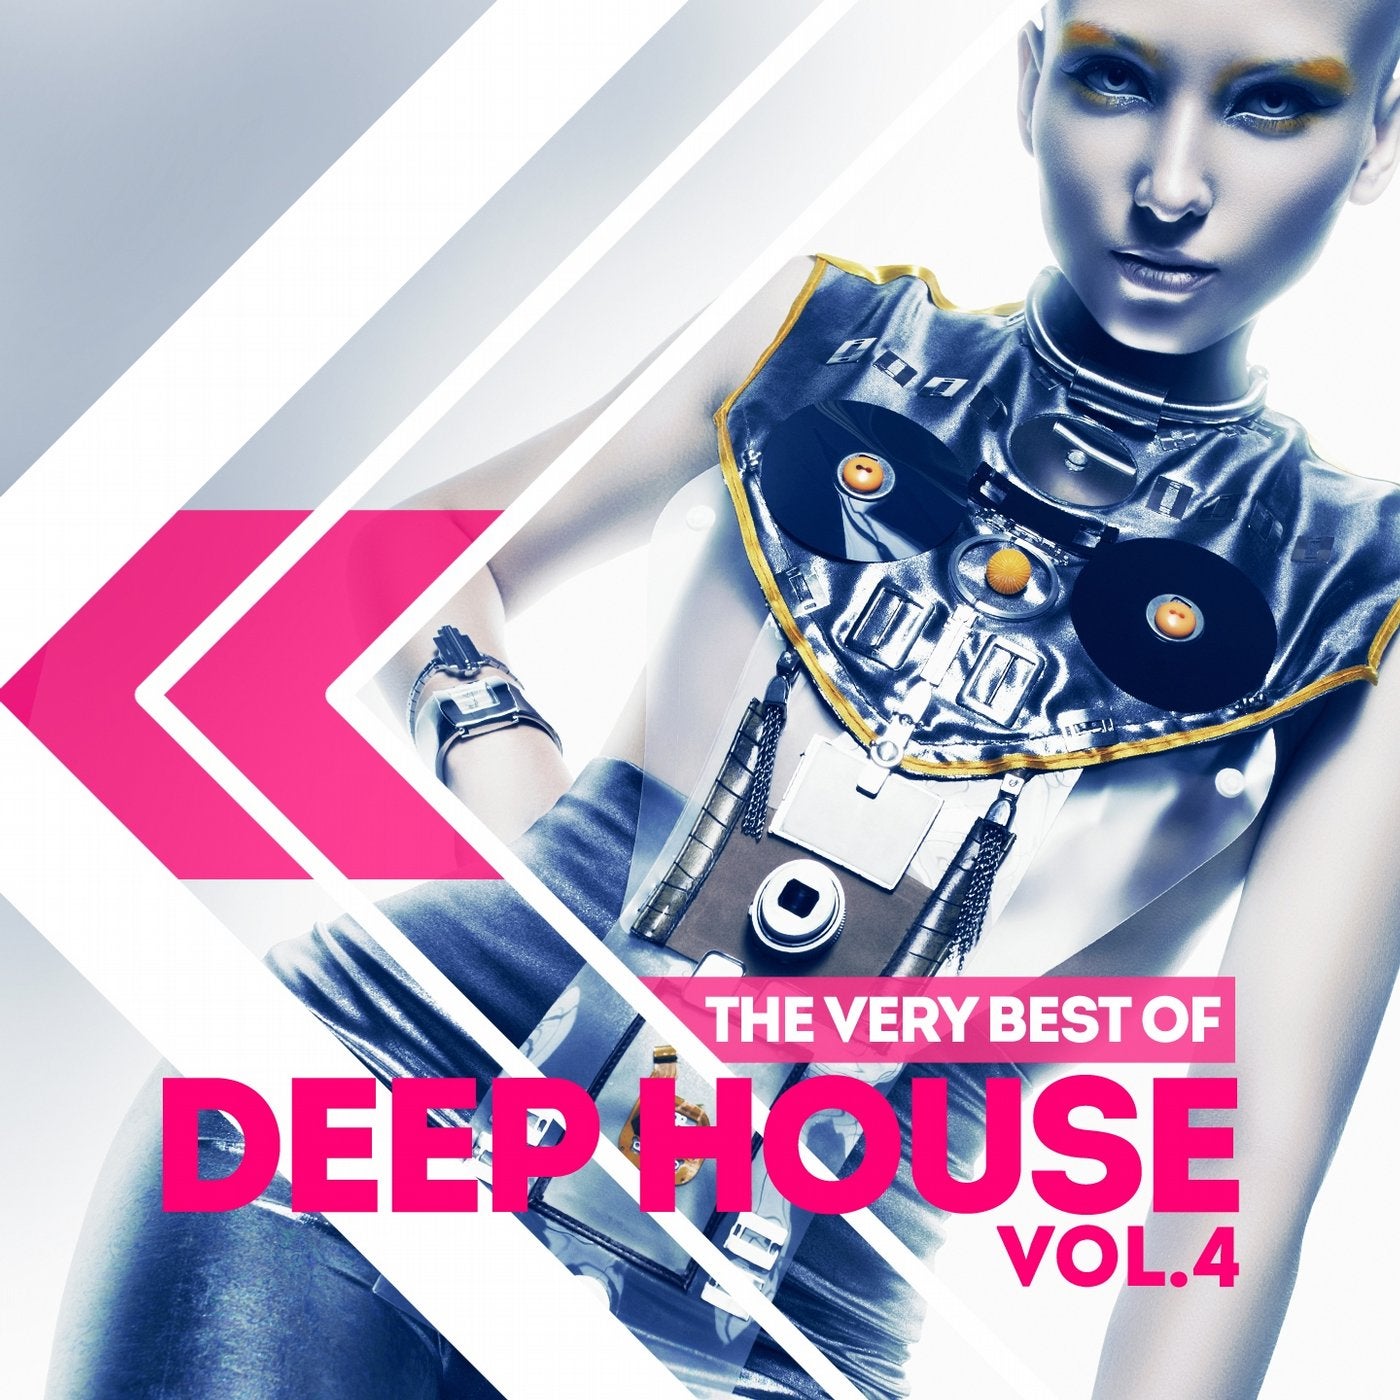 The Very Best of Deep House, Vol. 4